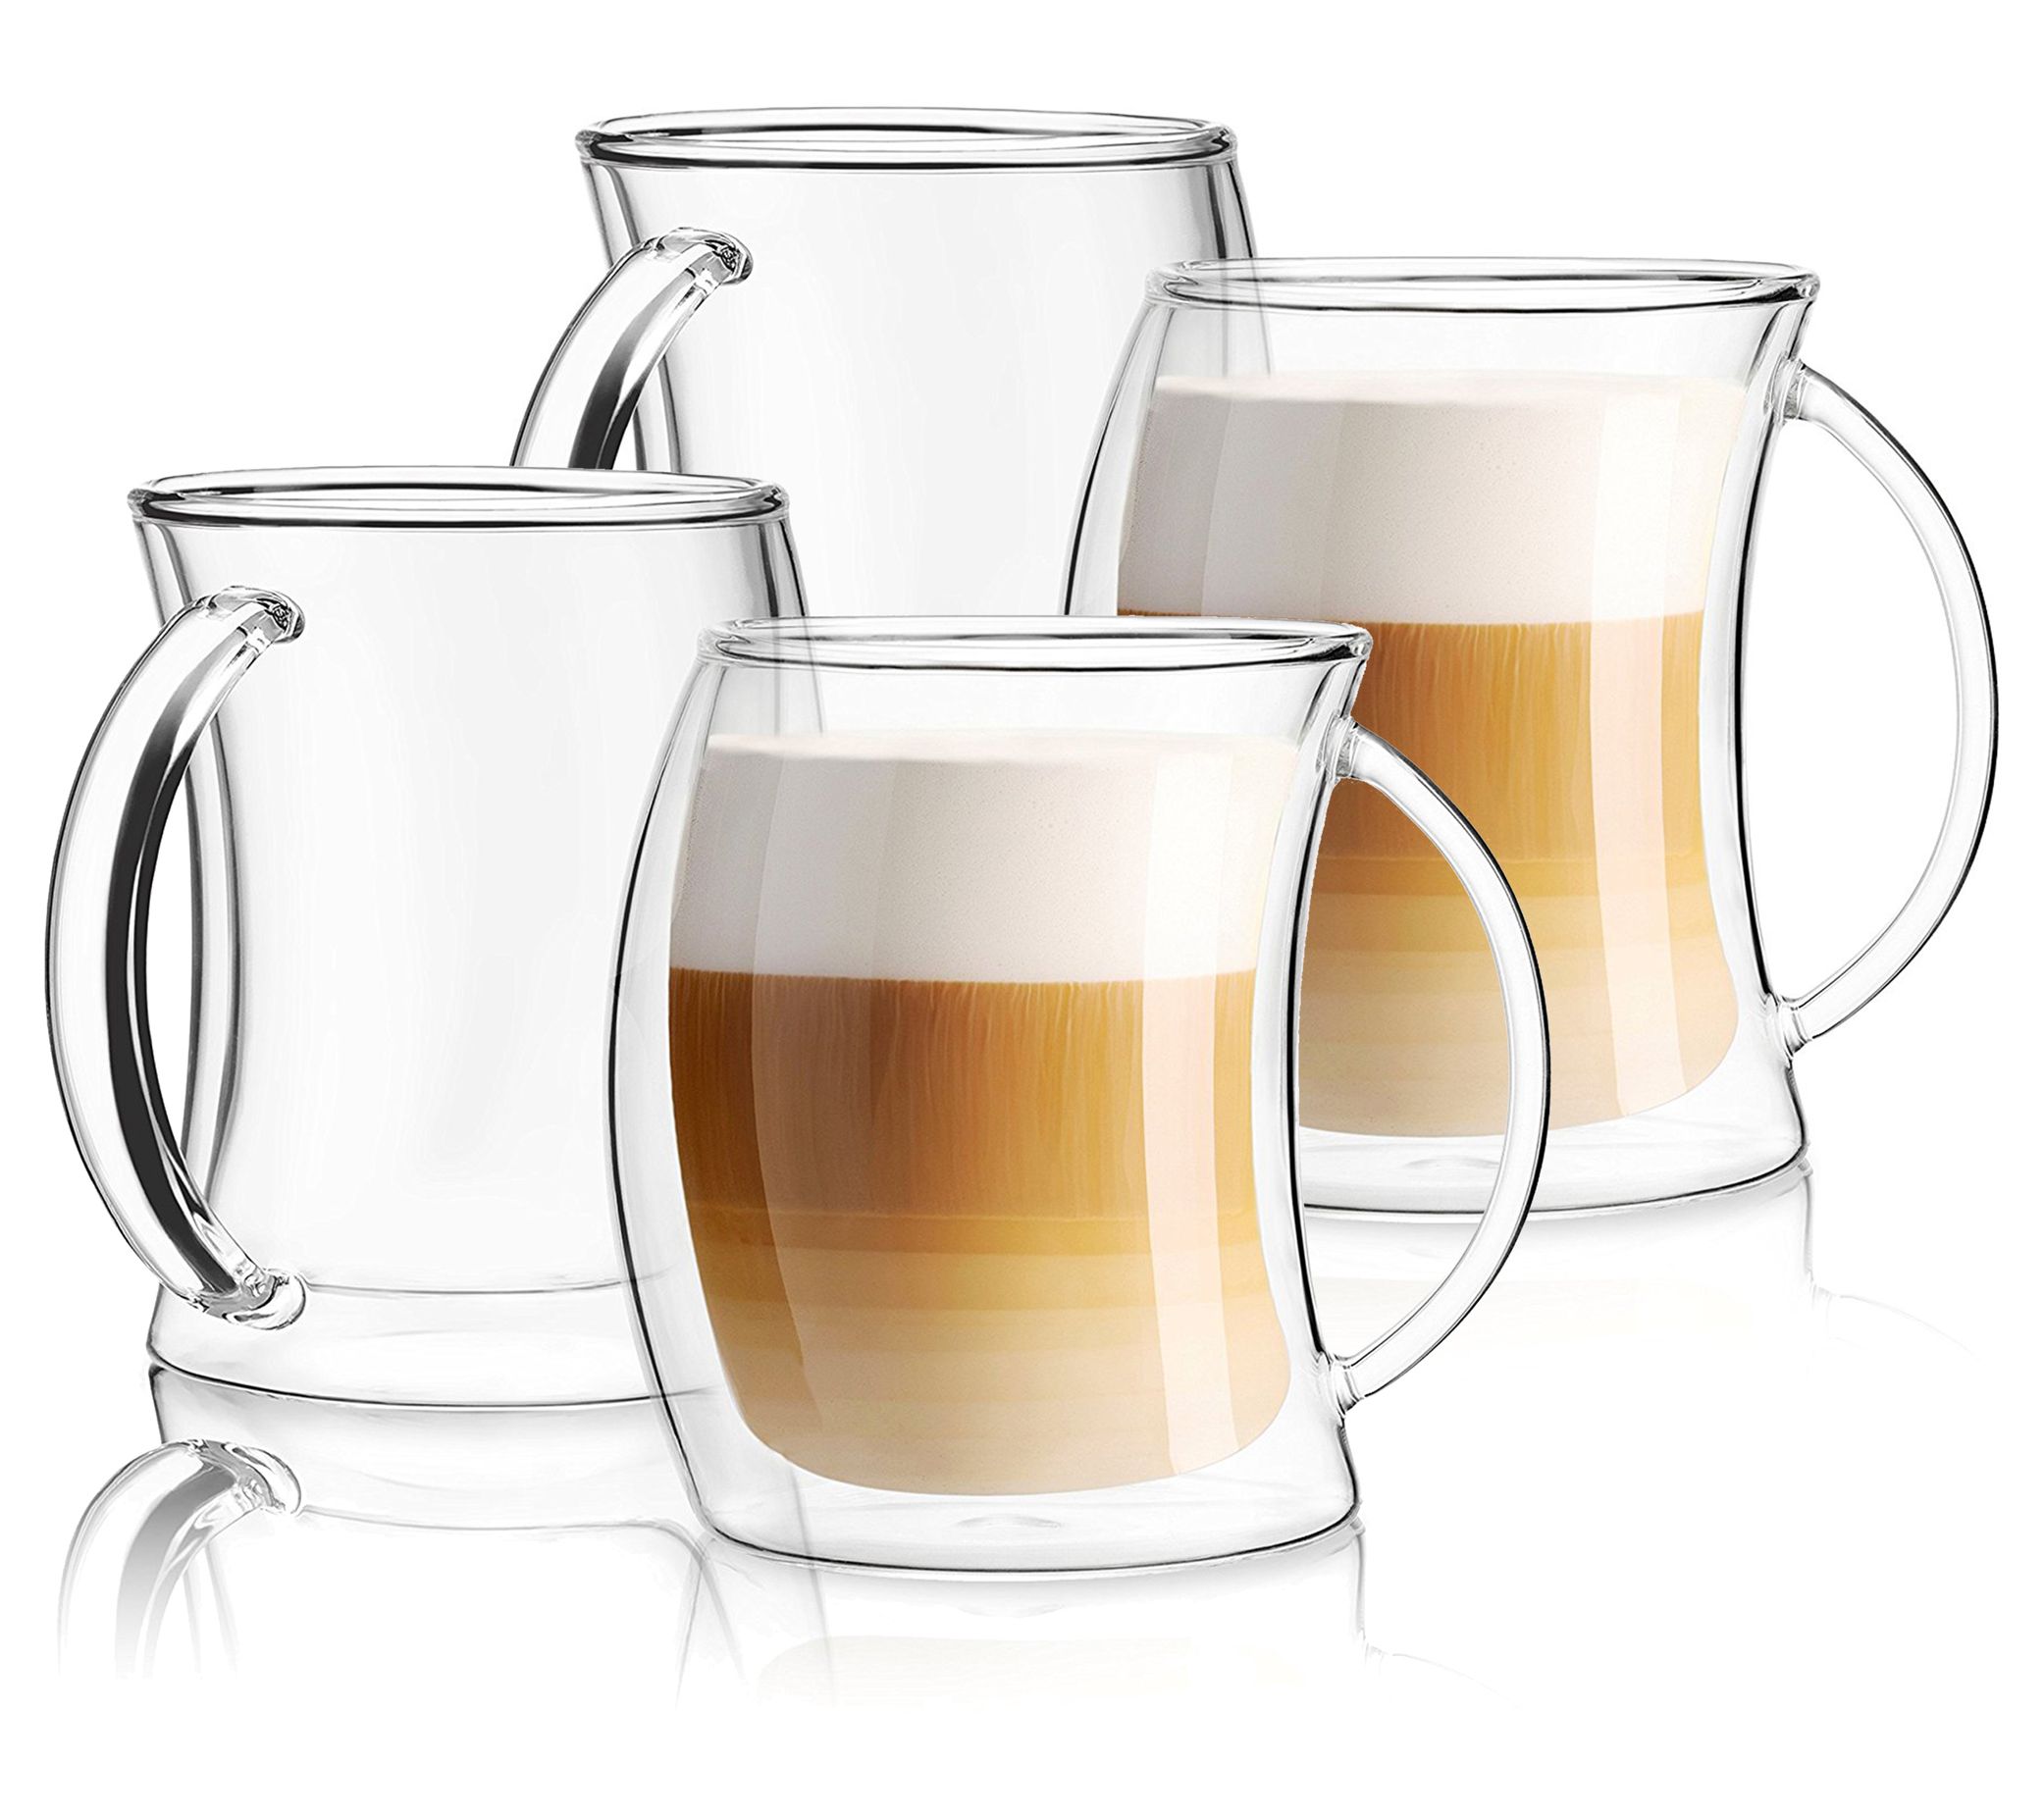 JoyJolt Double Wall Glass Coffee Mugs - 13.5oz Diner Coffee Mug  Set of 2 Glass Coffee Cups. Insulated Coffee Mug, Cappuccino Cup, Latte Cup.  Glasses That Don't Sweat, Clear Mugs